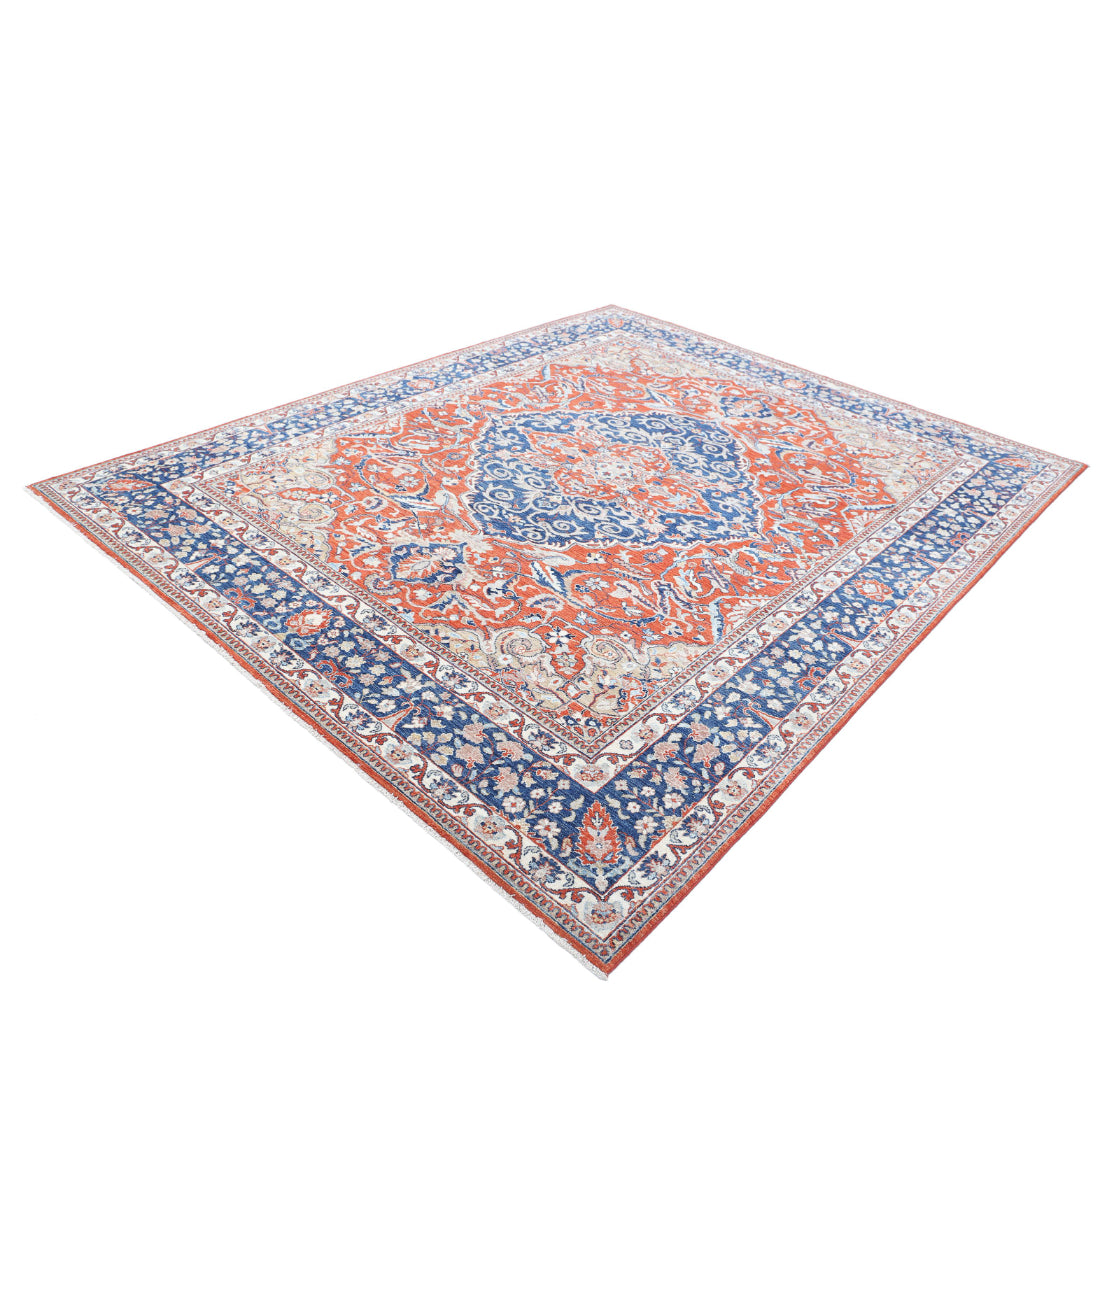 Heriz 7'11'' X 9'10'' Hand-Knotted Wool Rug 7'11'' x 9'10'' (238 X 295) / Red / Blue